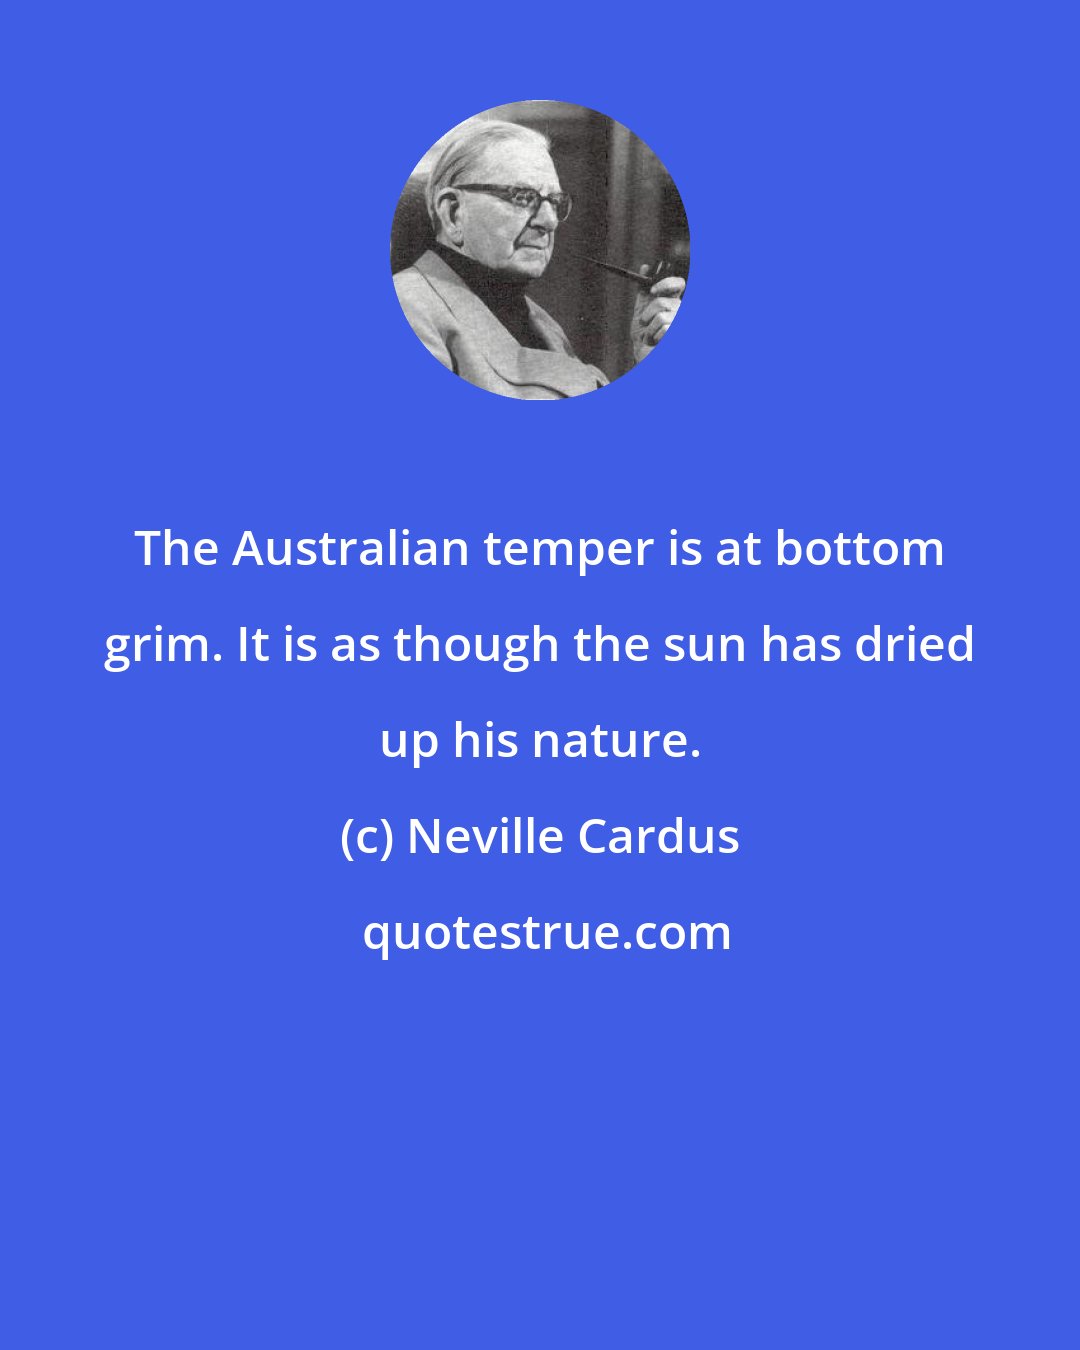 Neville Cardus: The Australian temper is at bottom grim. It is as though the sun has dried up his nature.